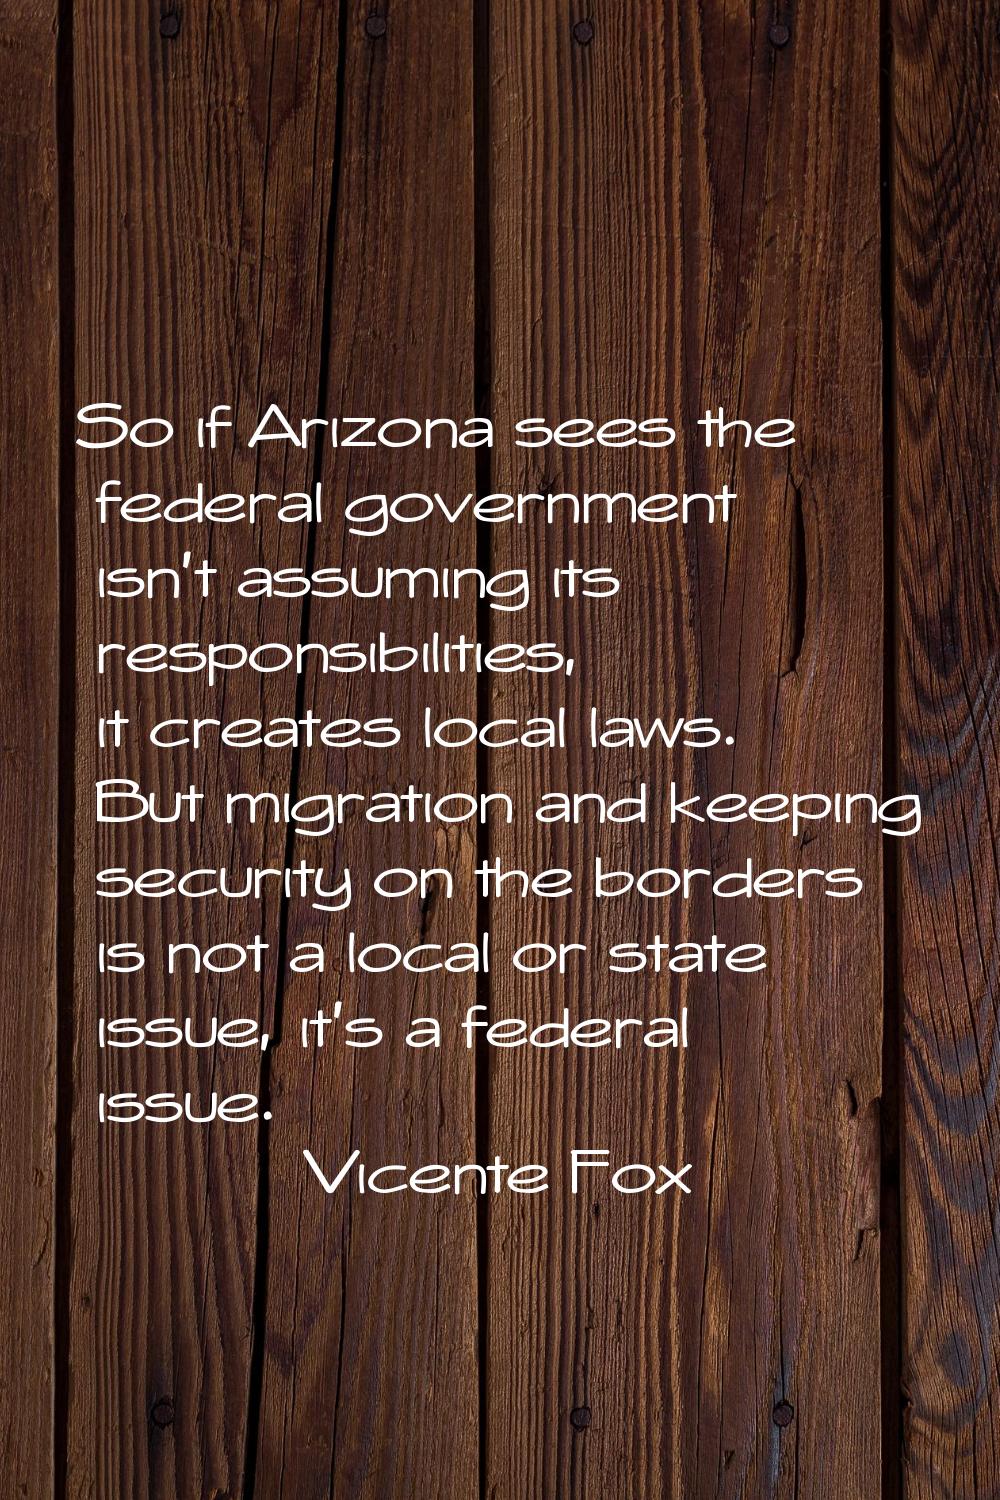 So if Arizona sees the federal government isn't assuming its responsibilities, it creates local law